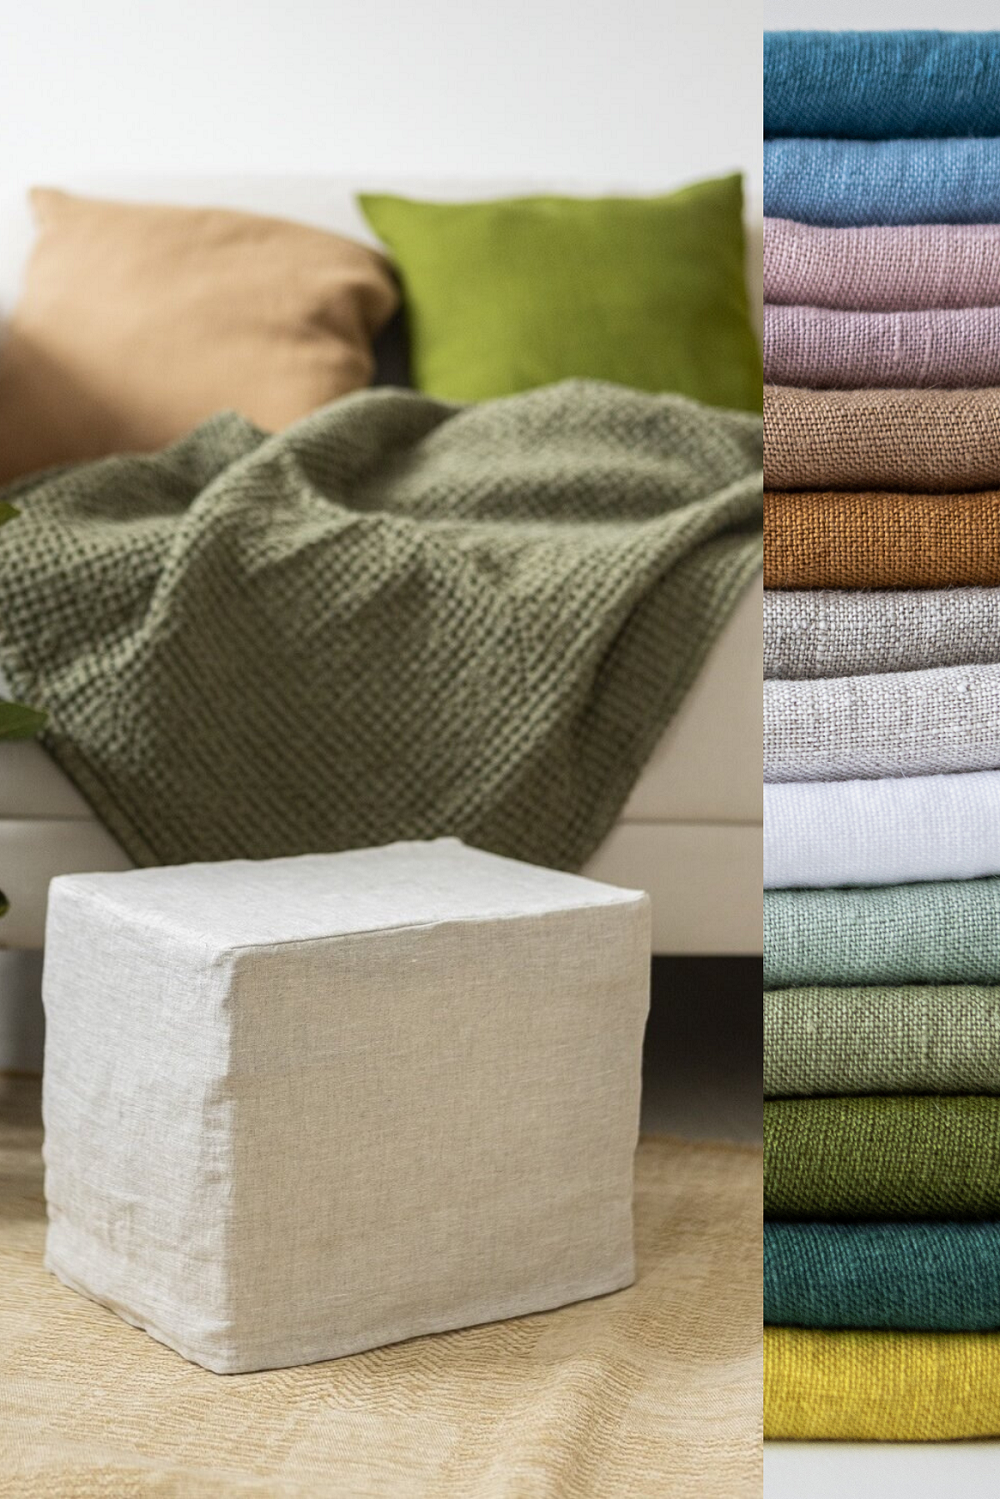 Linen ottoman cover in various colors - Easy Linen Crafts